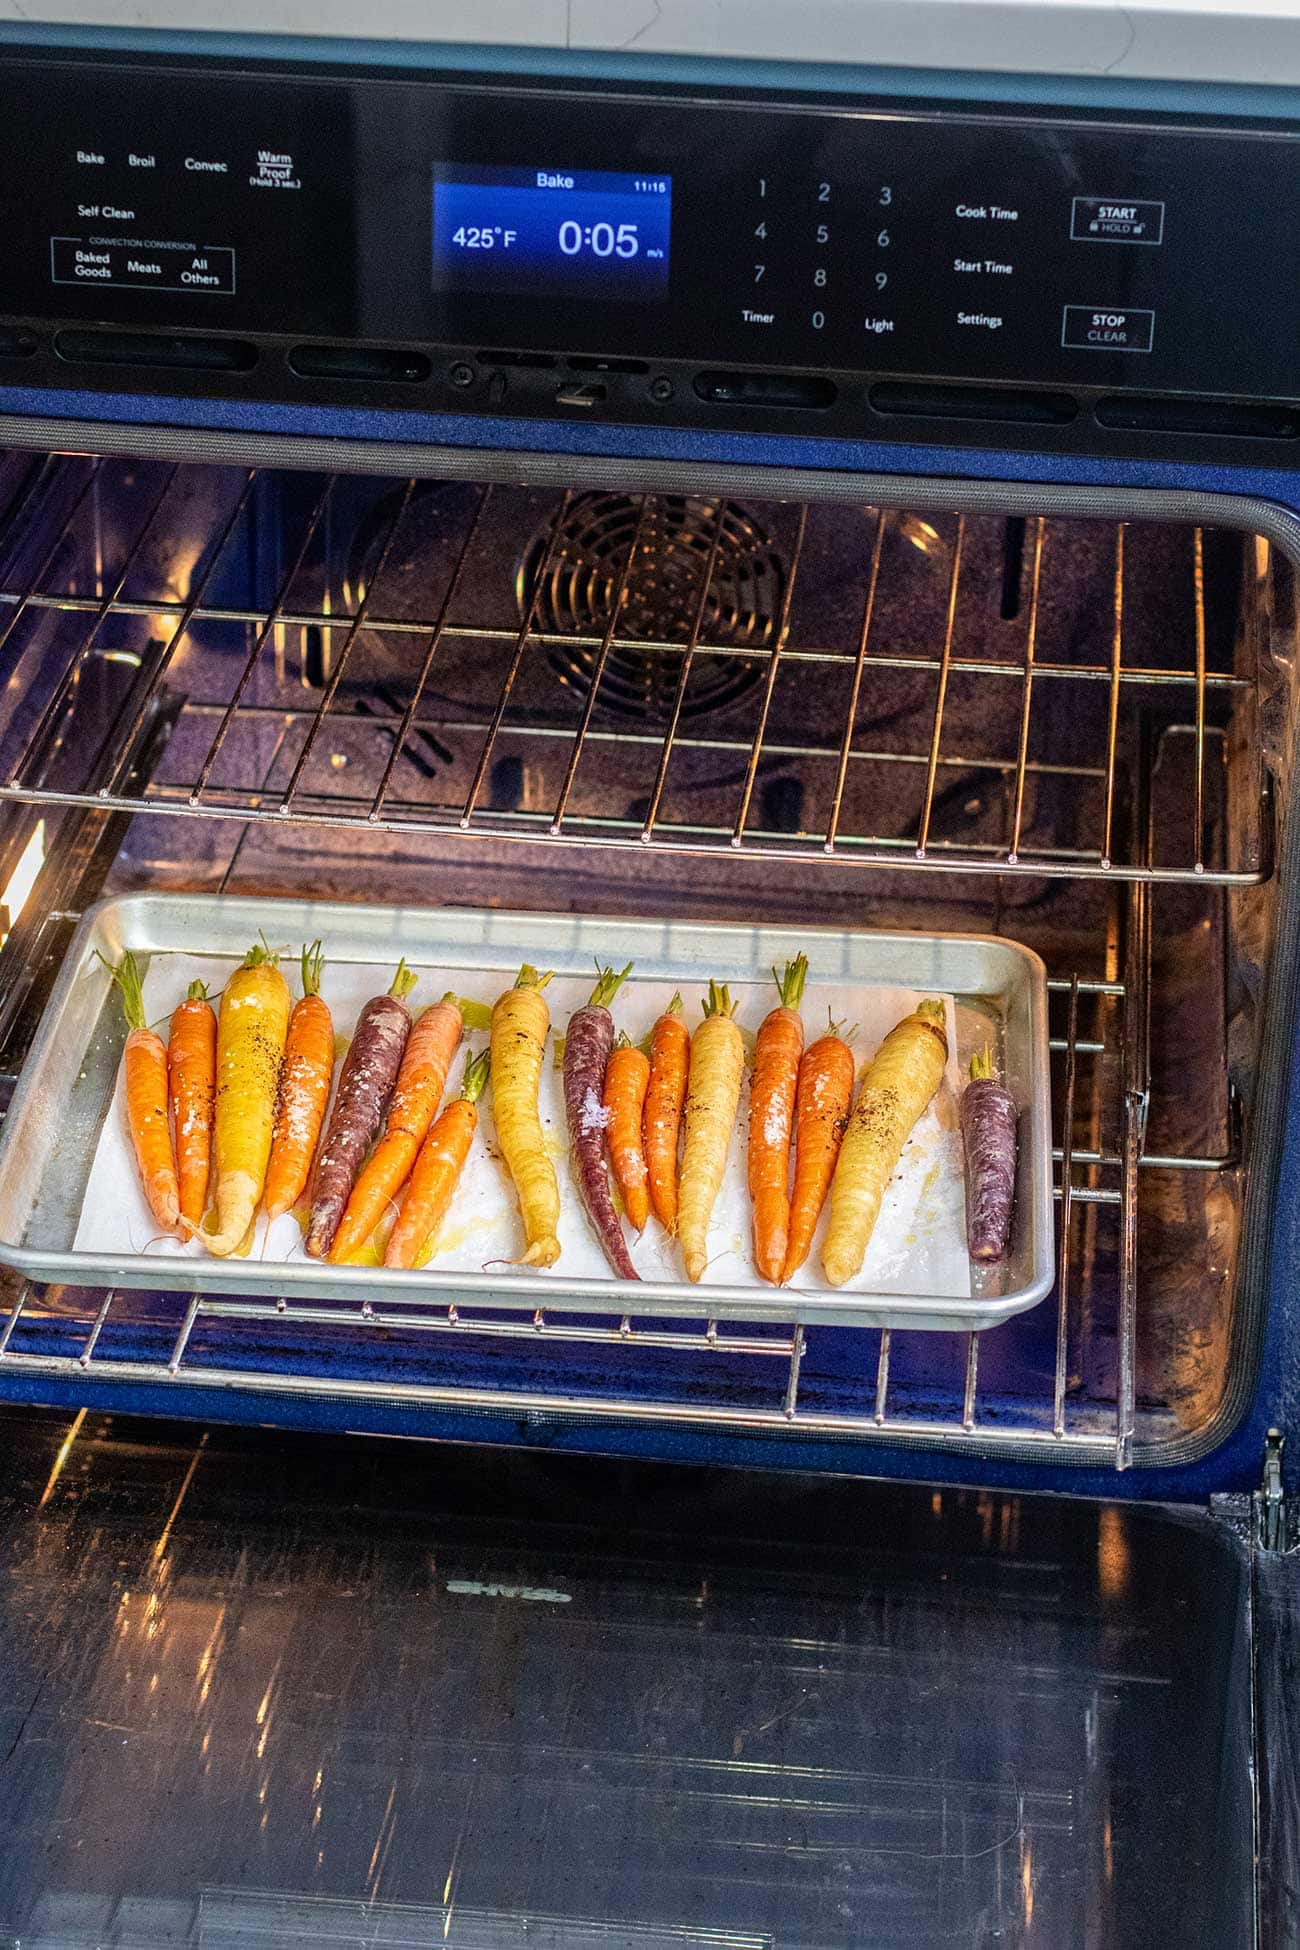 Rainbow carrots in an oven.